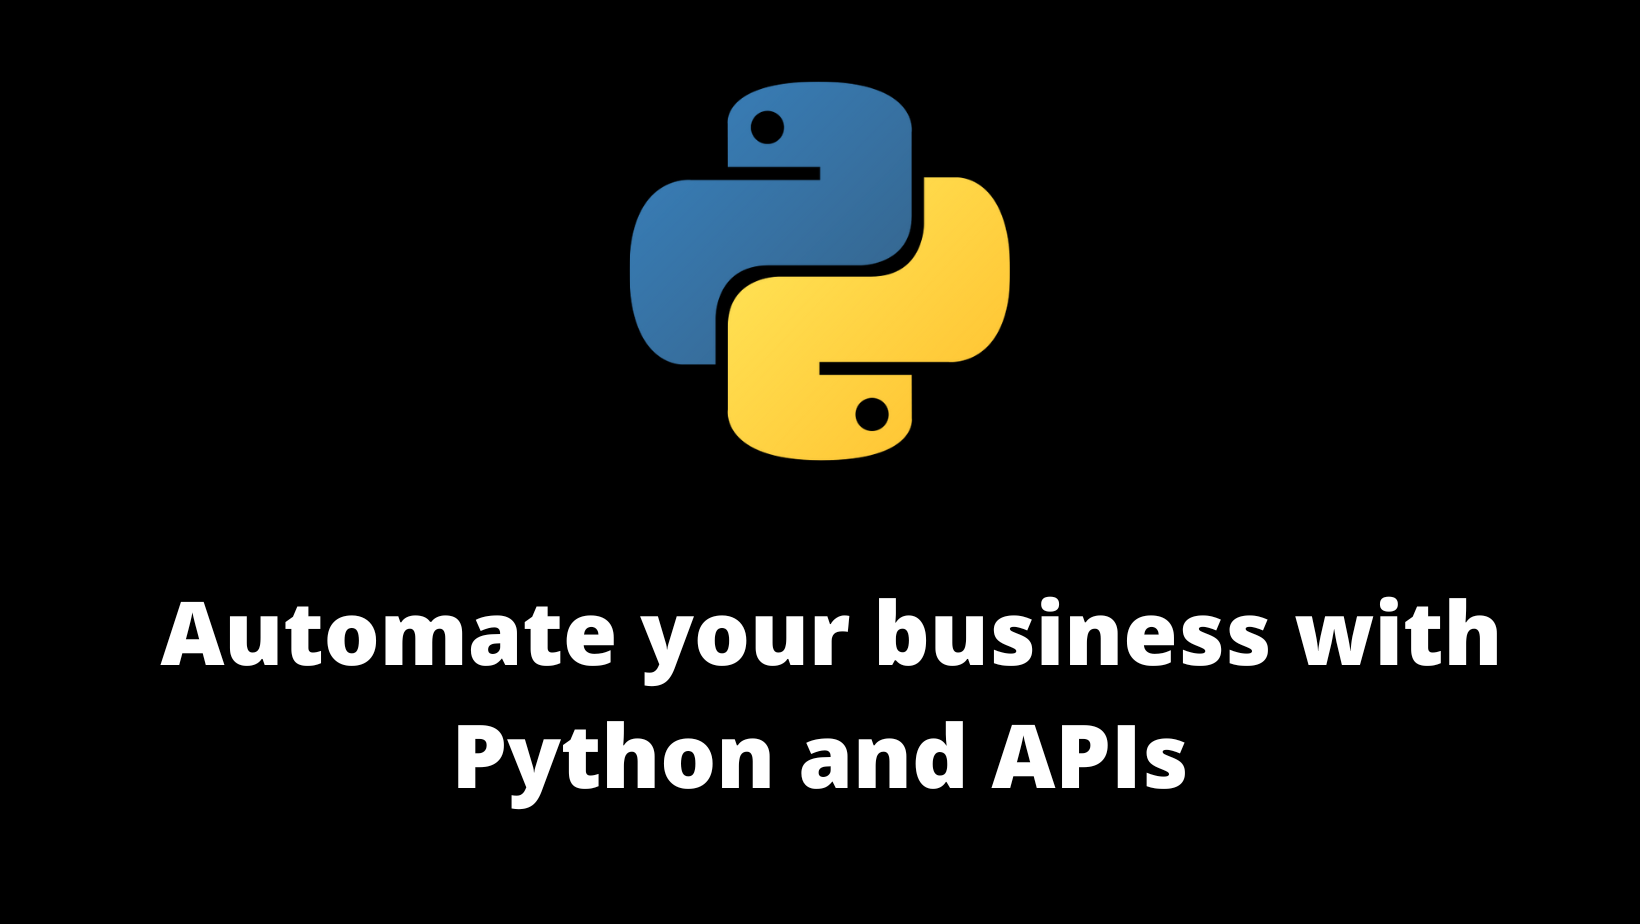 How to Automate Your Business Strategy with Python and APIs